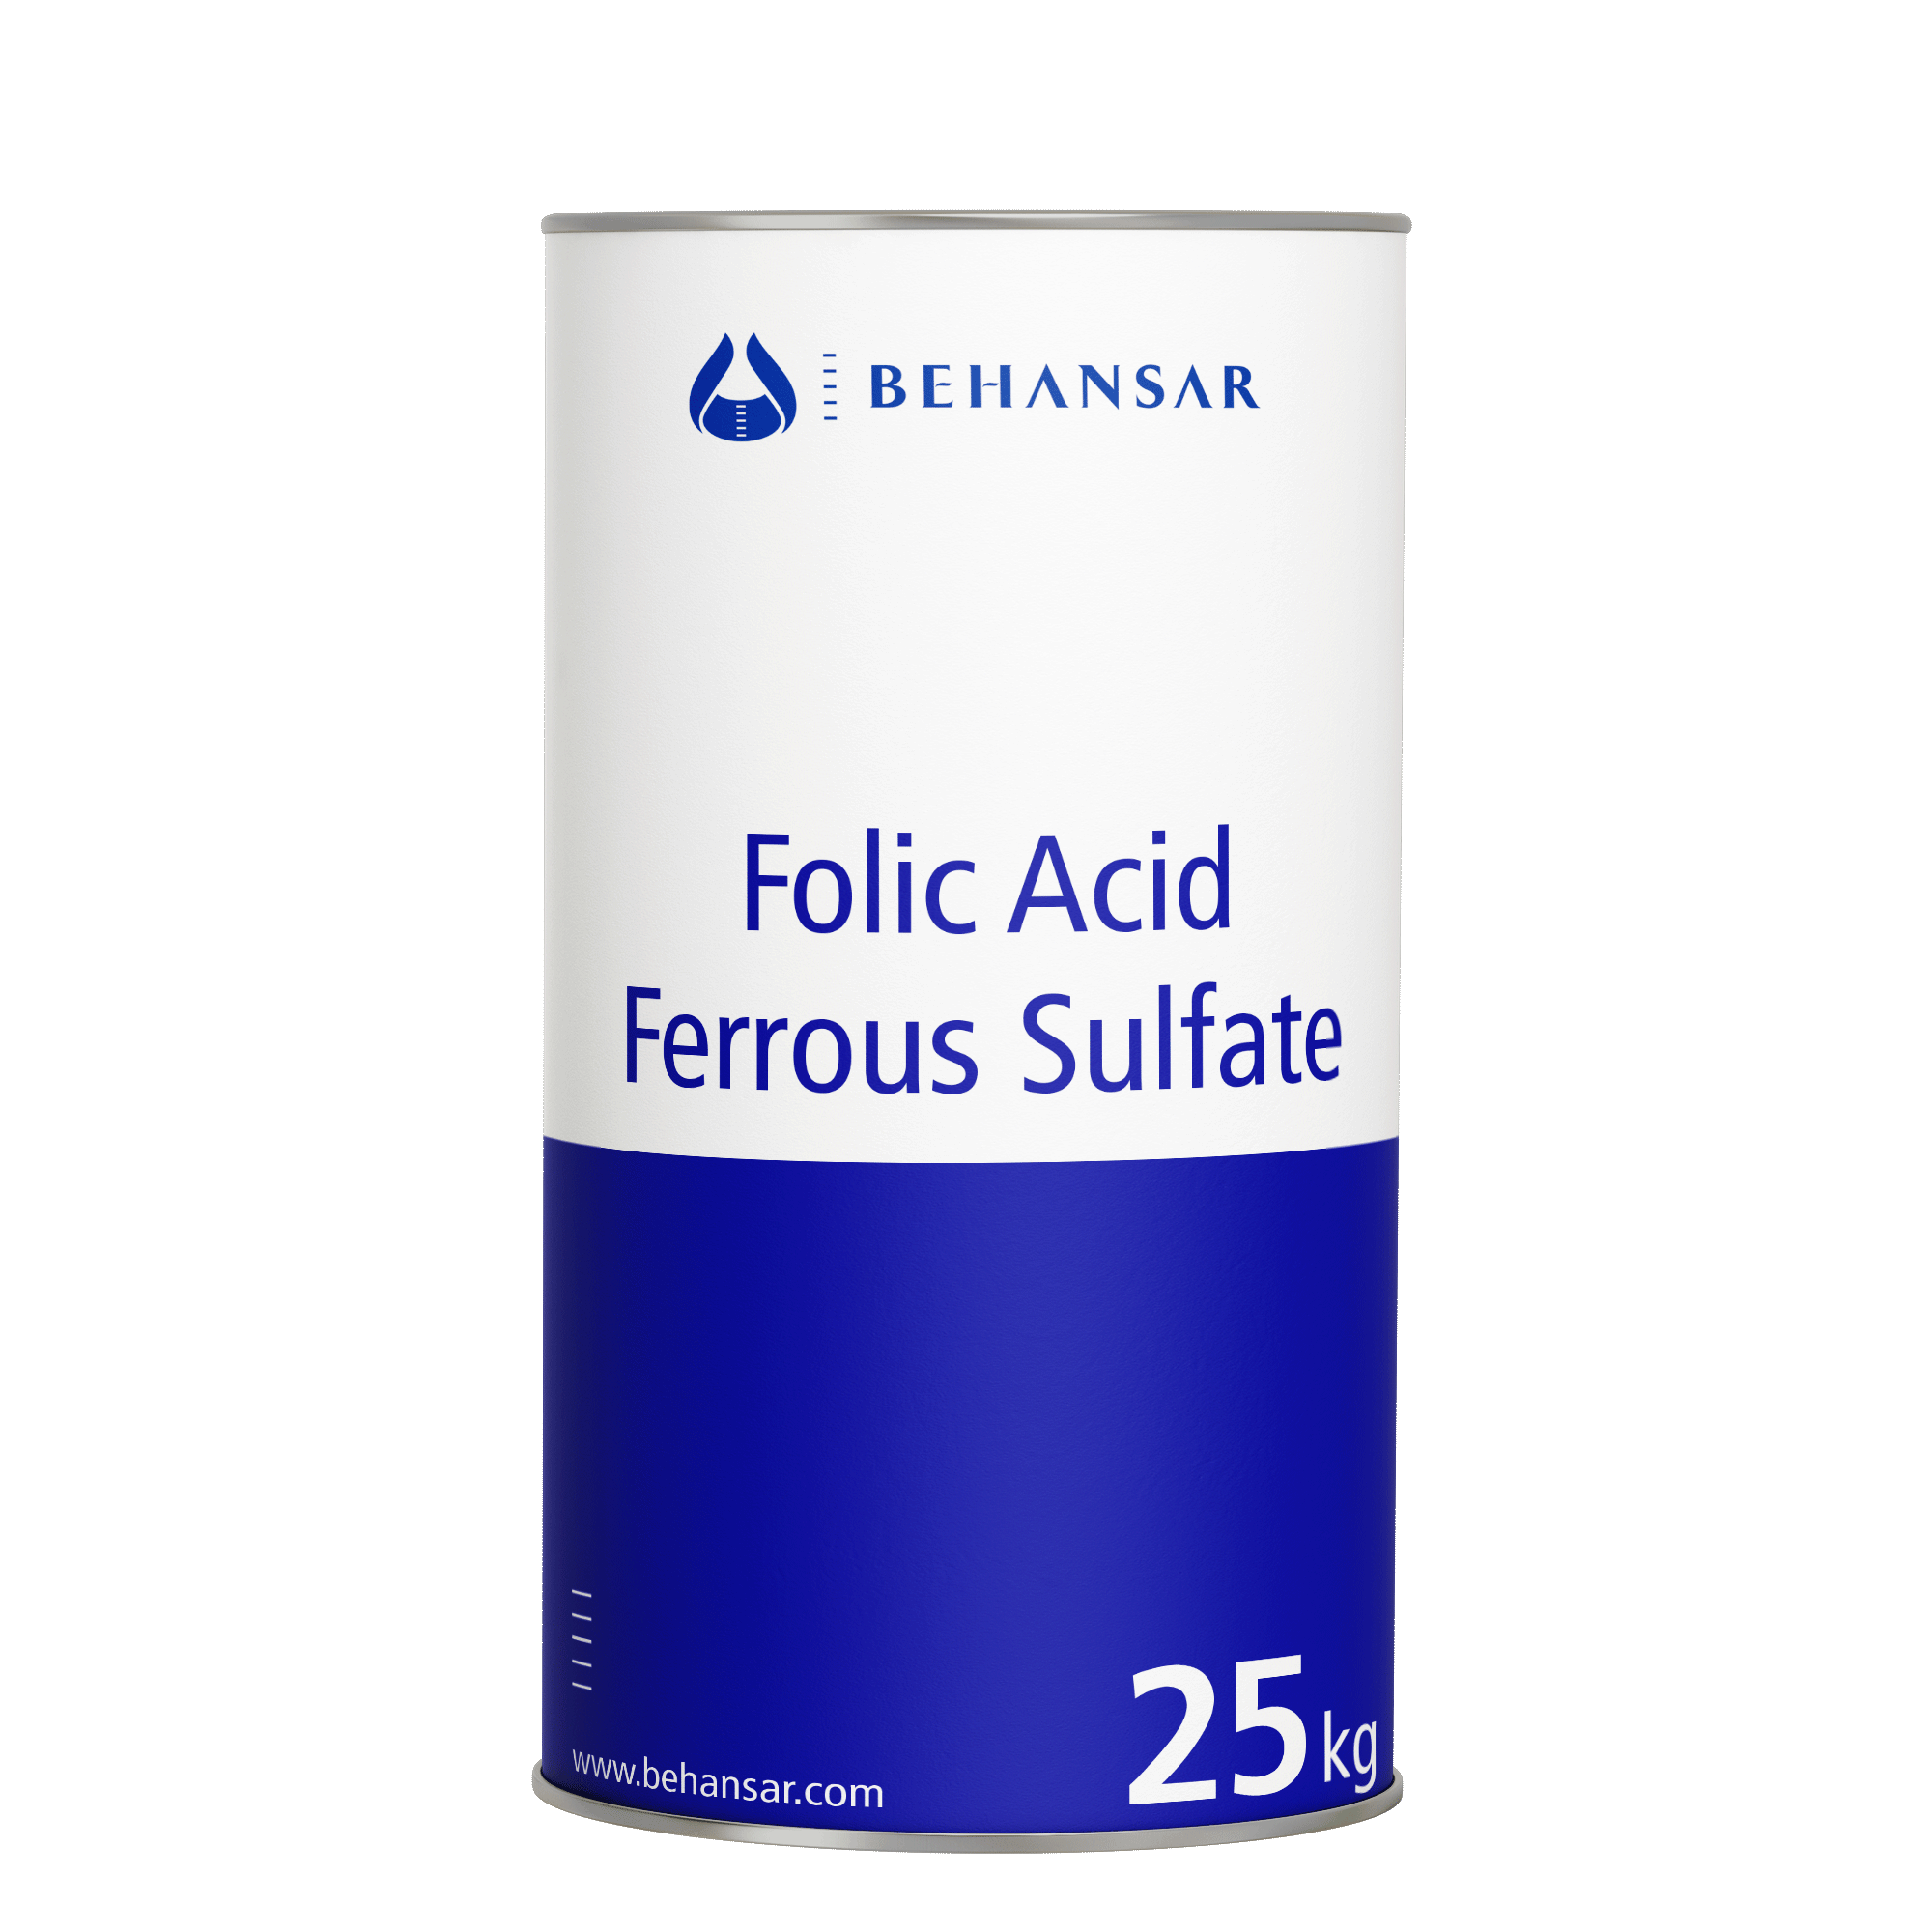 Folic Acid Ferrous Sulfate is one of the products of Behansar Co